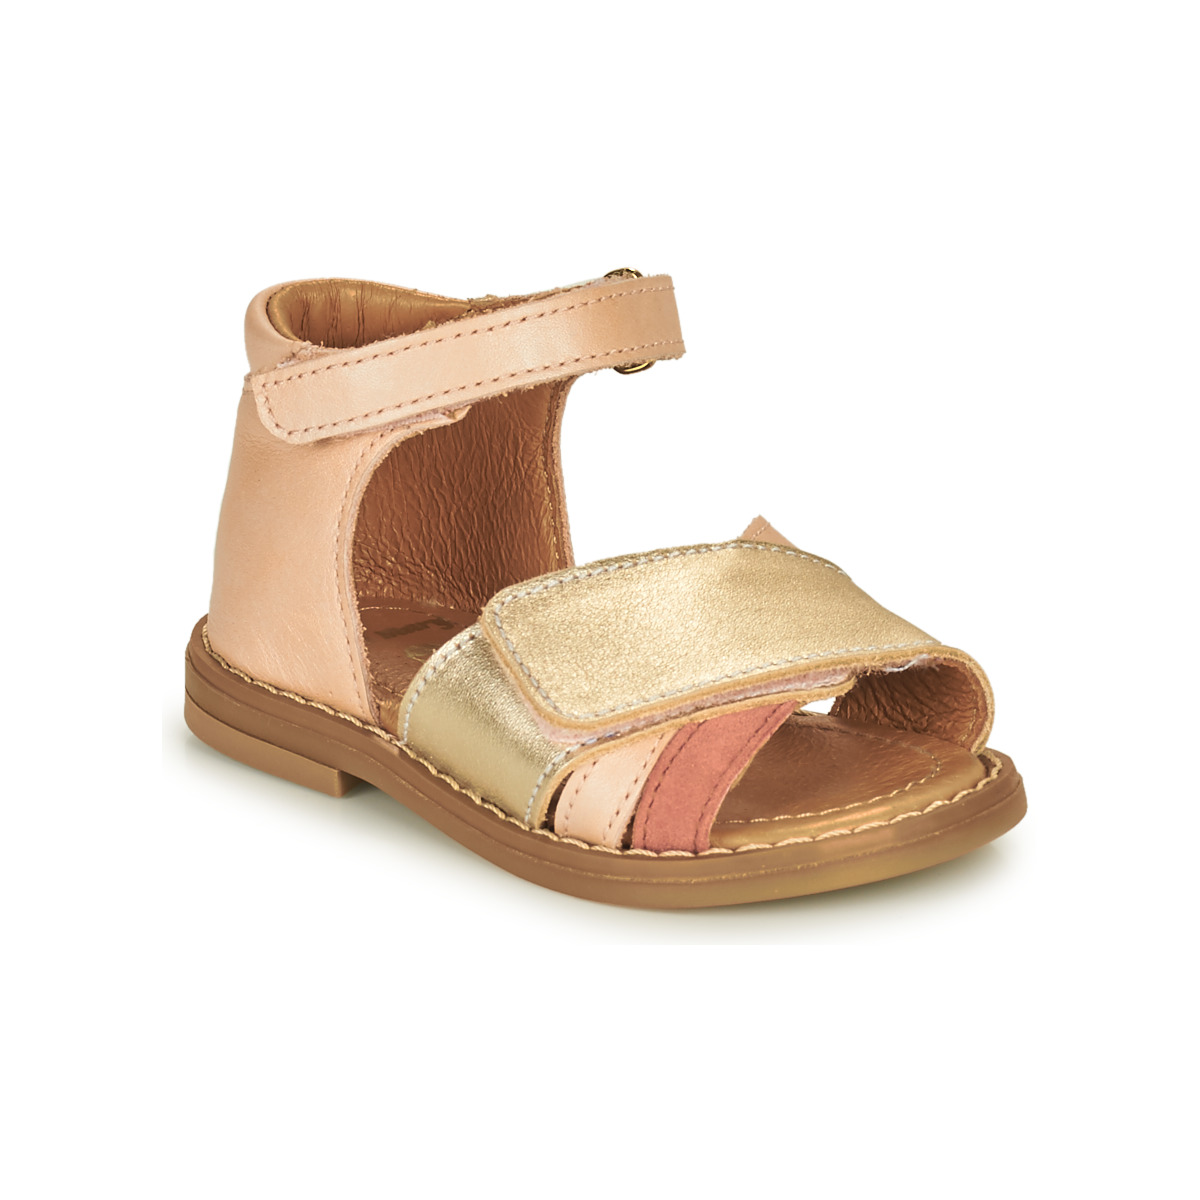 Chaussures Fille Sandales et Nu-pieds Little Mary TERIGA Rose